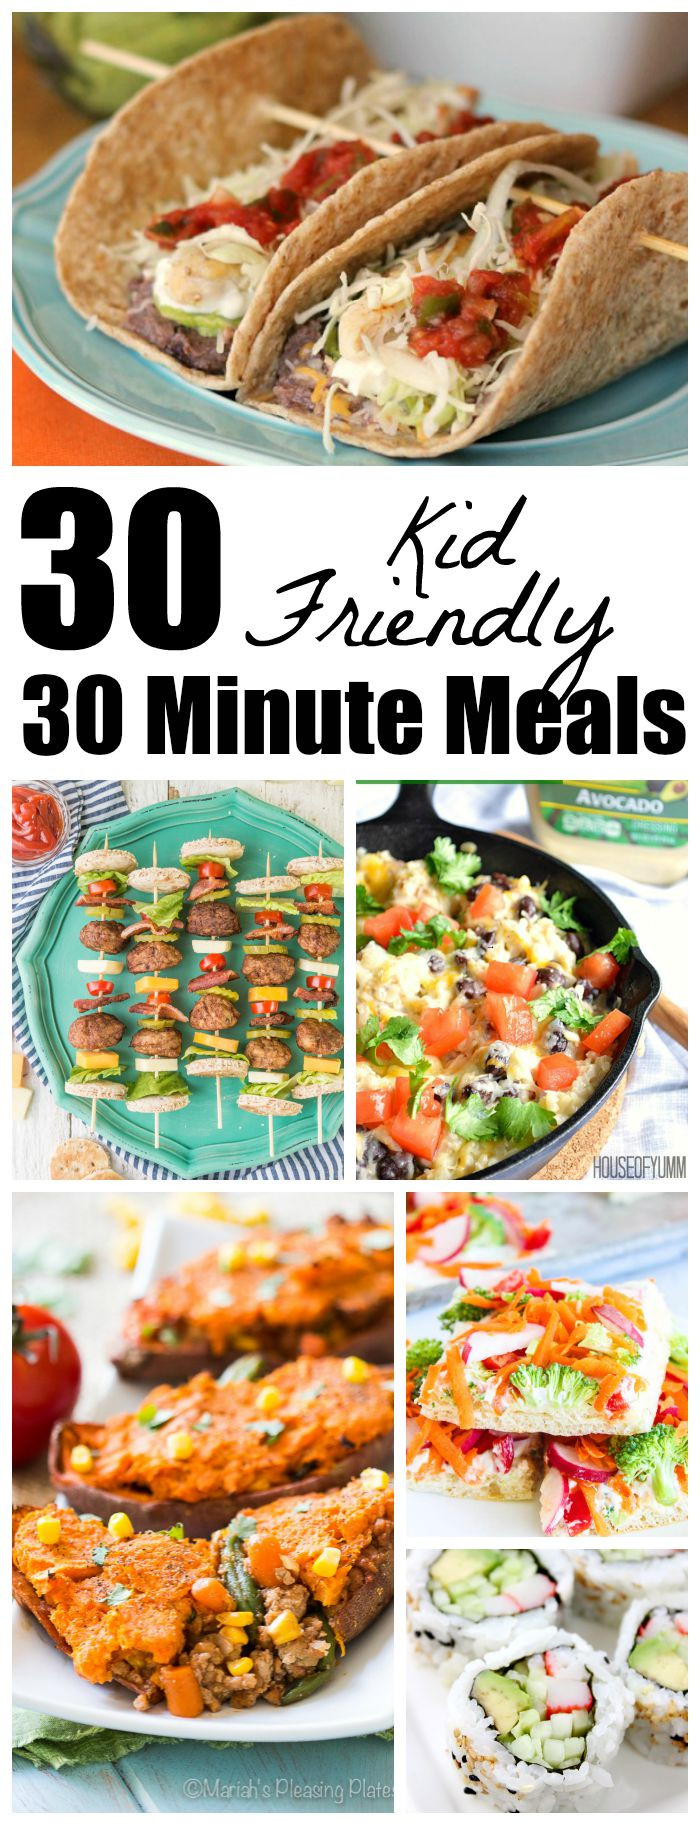 30 Minute Meals for Kids Awesome 30 Kid Friendly 30 Minute Meals the Weary Chef